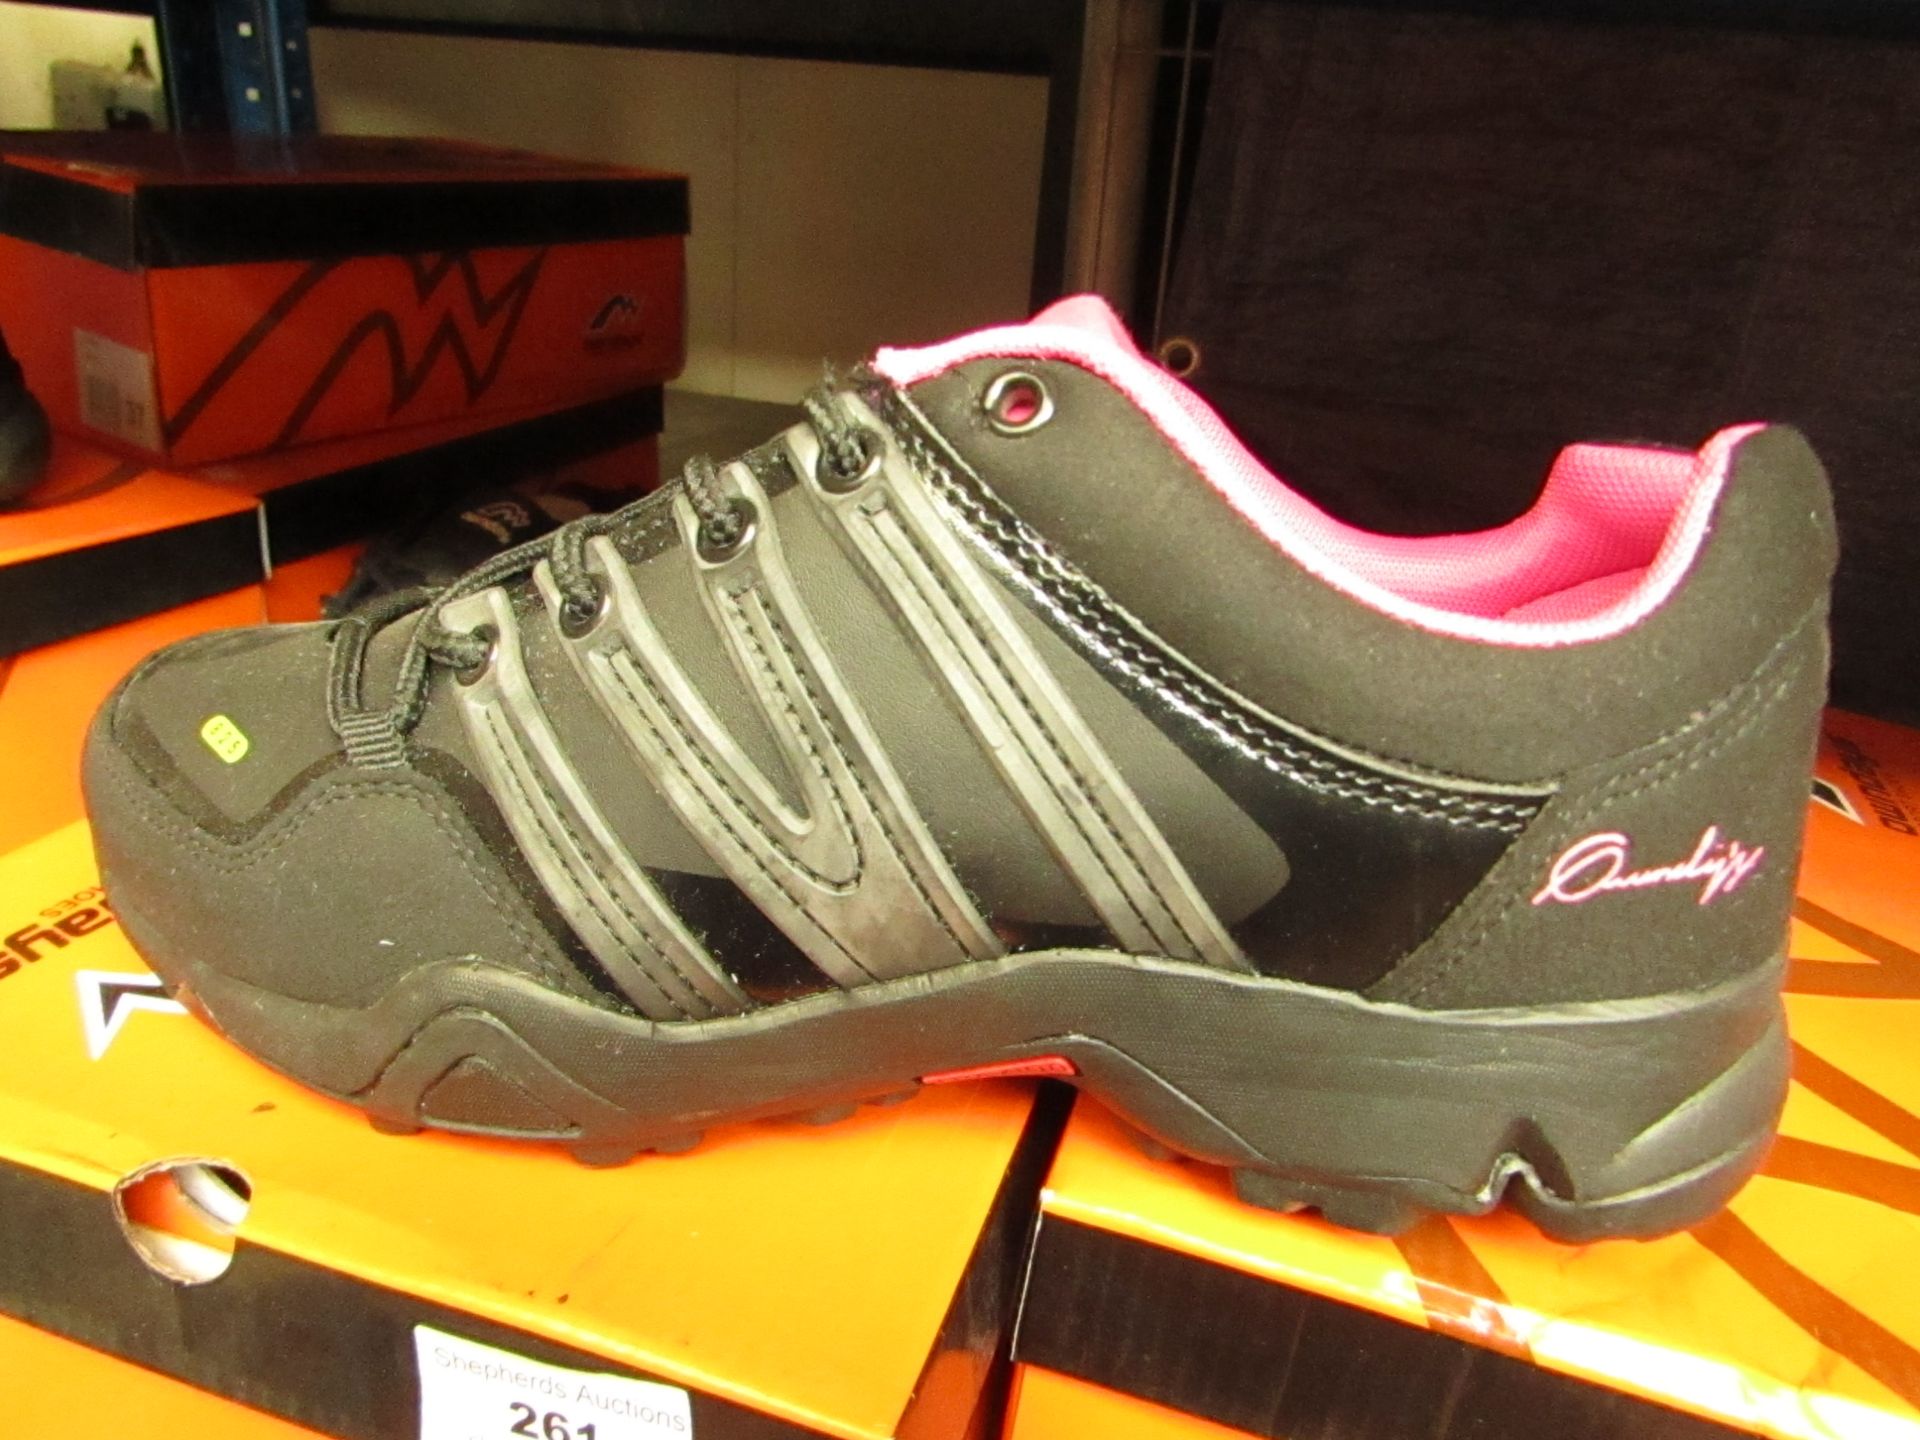 Owndays Traxion Sport Trainer size 37 new & boxed (see image for design)